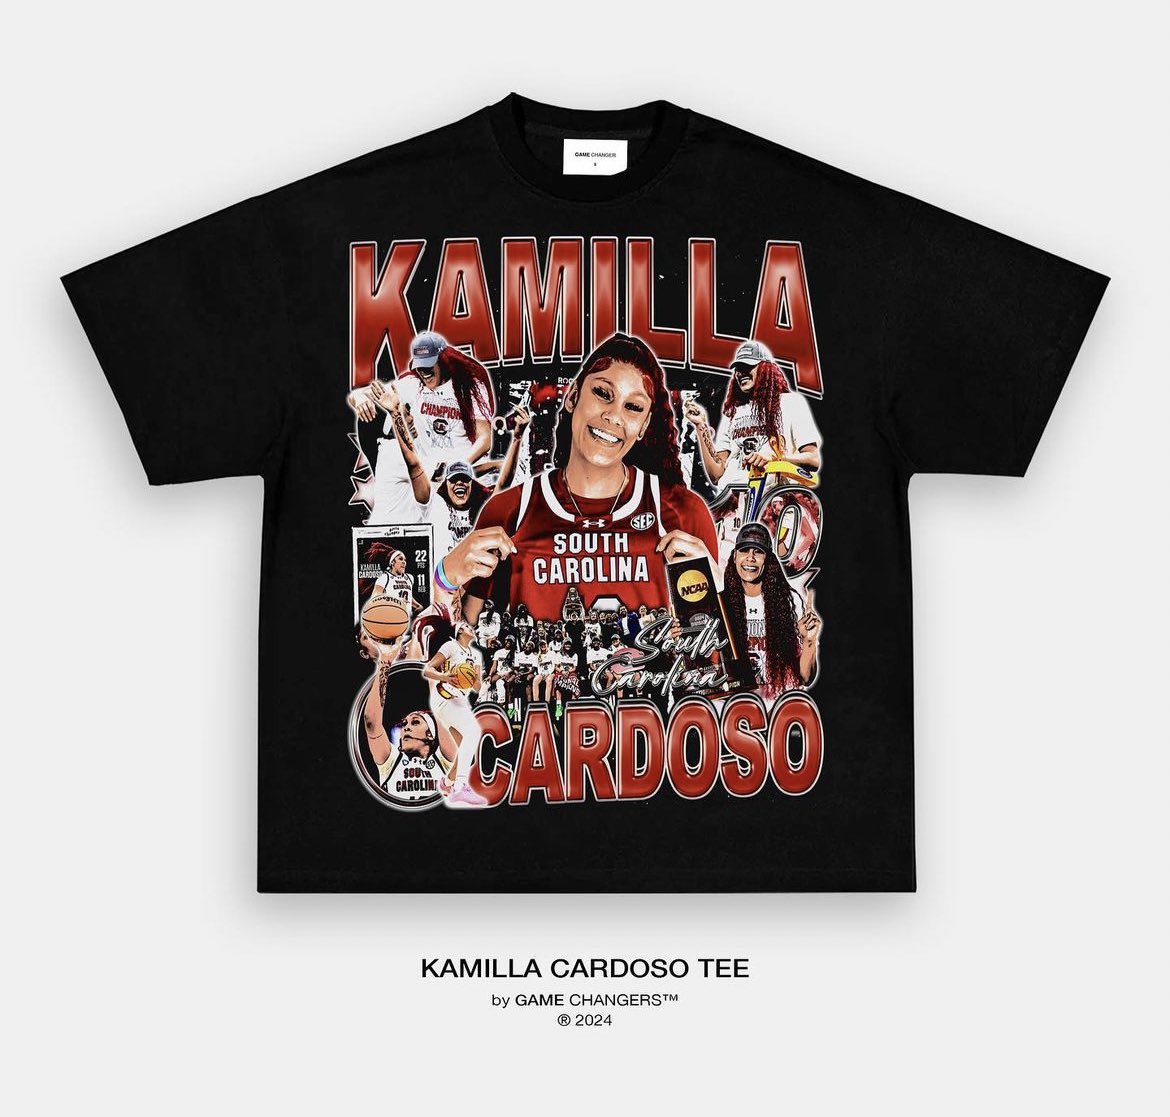 Louis Vuitton Dawn, South Carolina Champs, Cardoso tee and so much more in our latest Women’s Basketball pack 🔥➡️ gamechanger.la/collections/ne… #Gamecocks #SouthCarolina